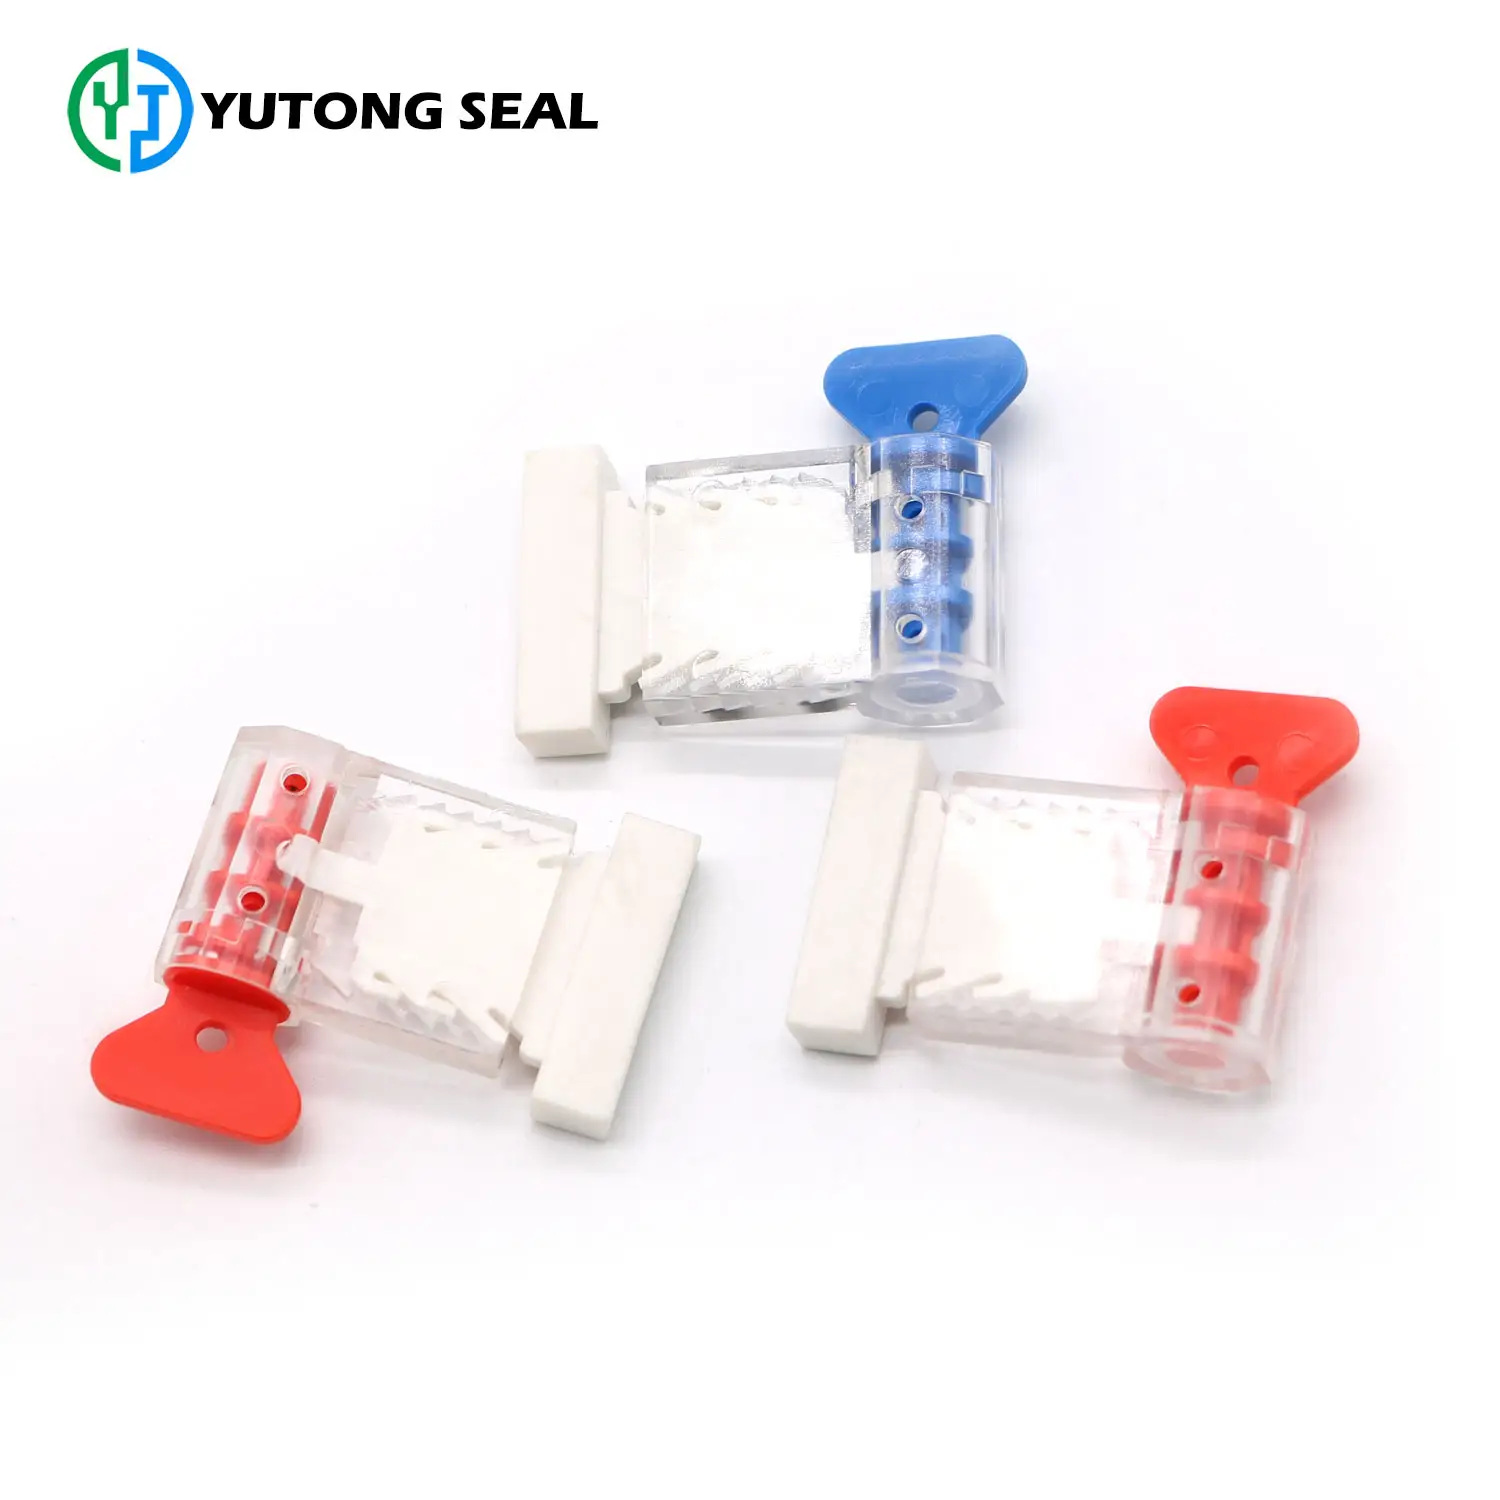 YTMS007 Lead seal of electric meter with high security and tamper proof metering seal